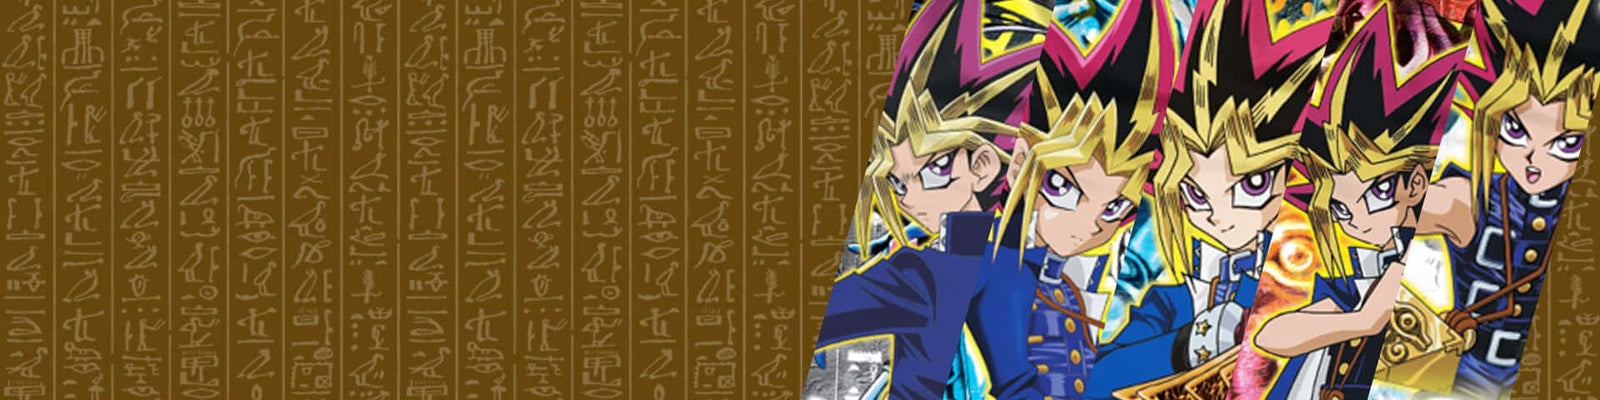 Yu-Gi-Oh New Releases and Pre-Orders